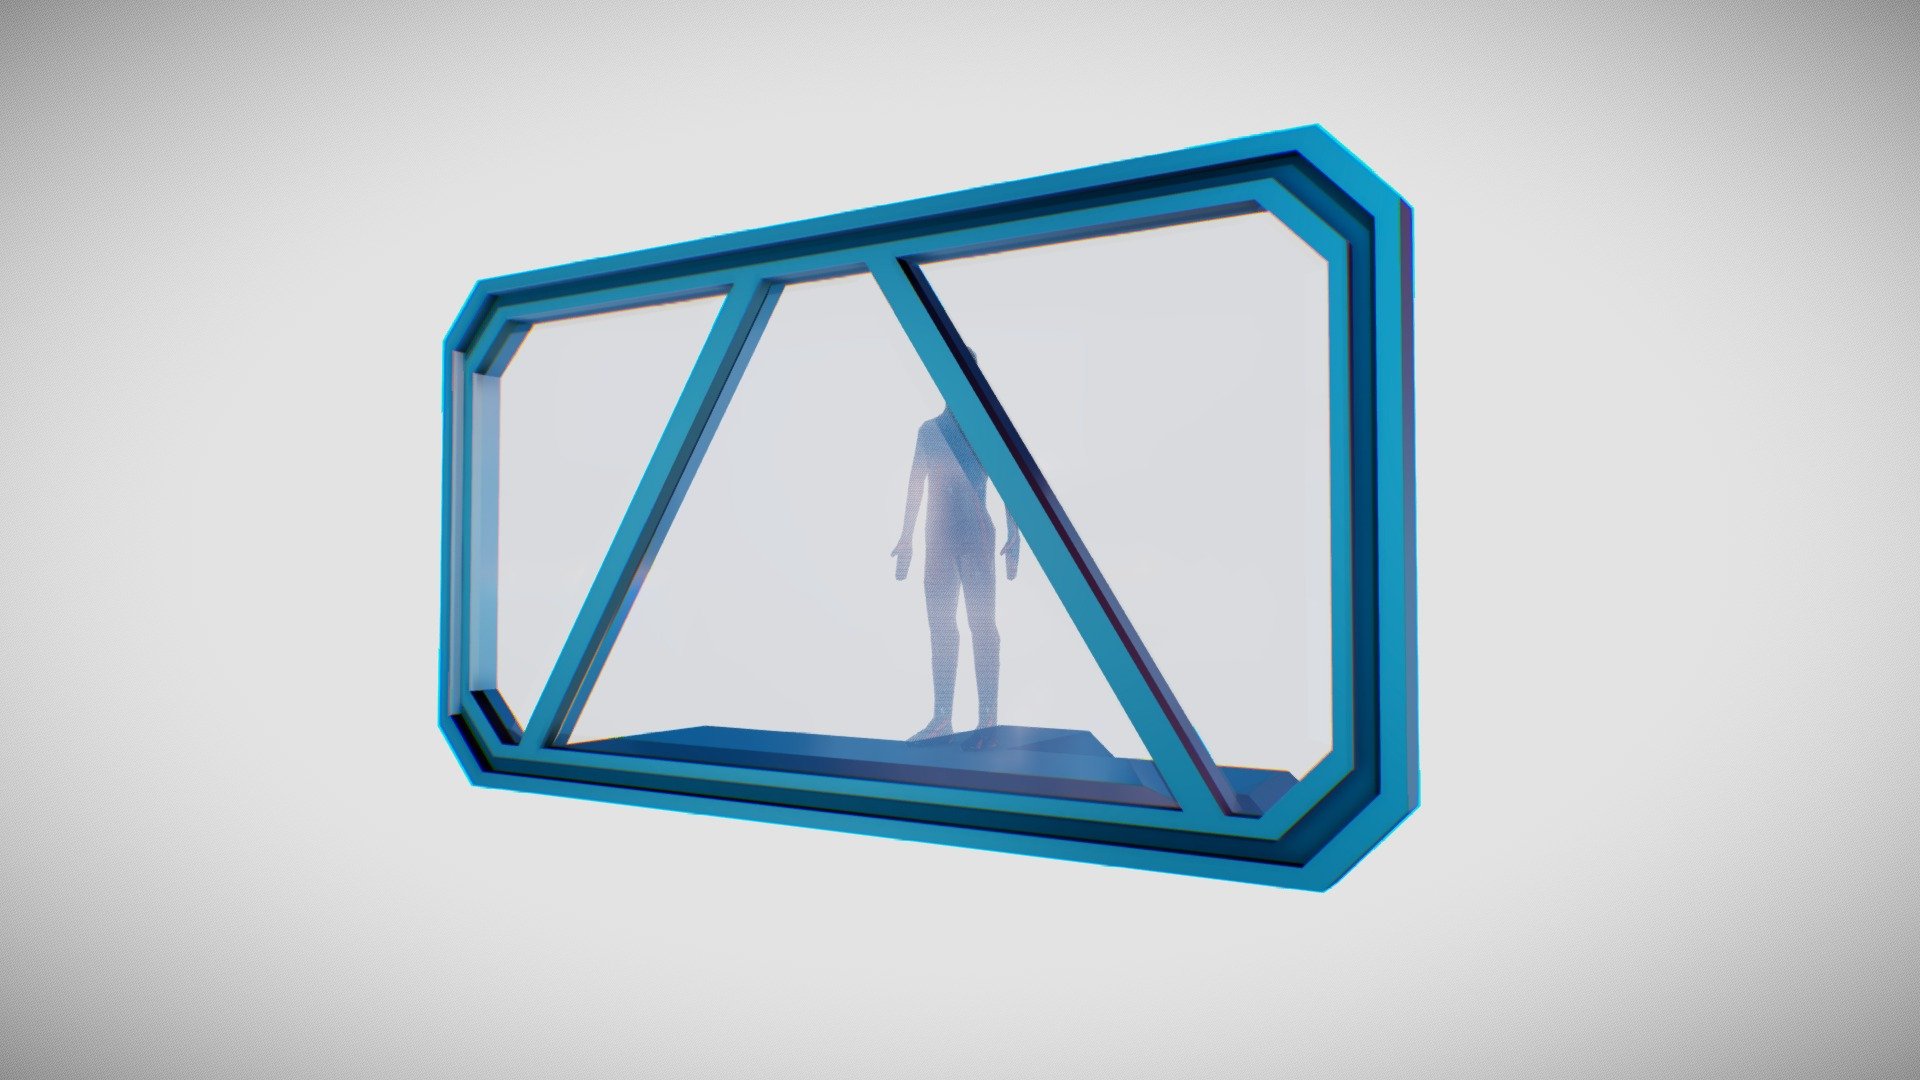 Futuristic SciFi Window_01

low poly base mesh for futuristic scifi window prop. arch/building  dressing 3d model